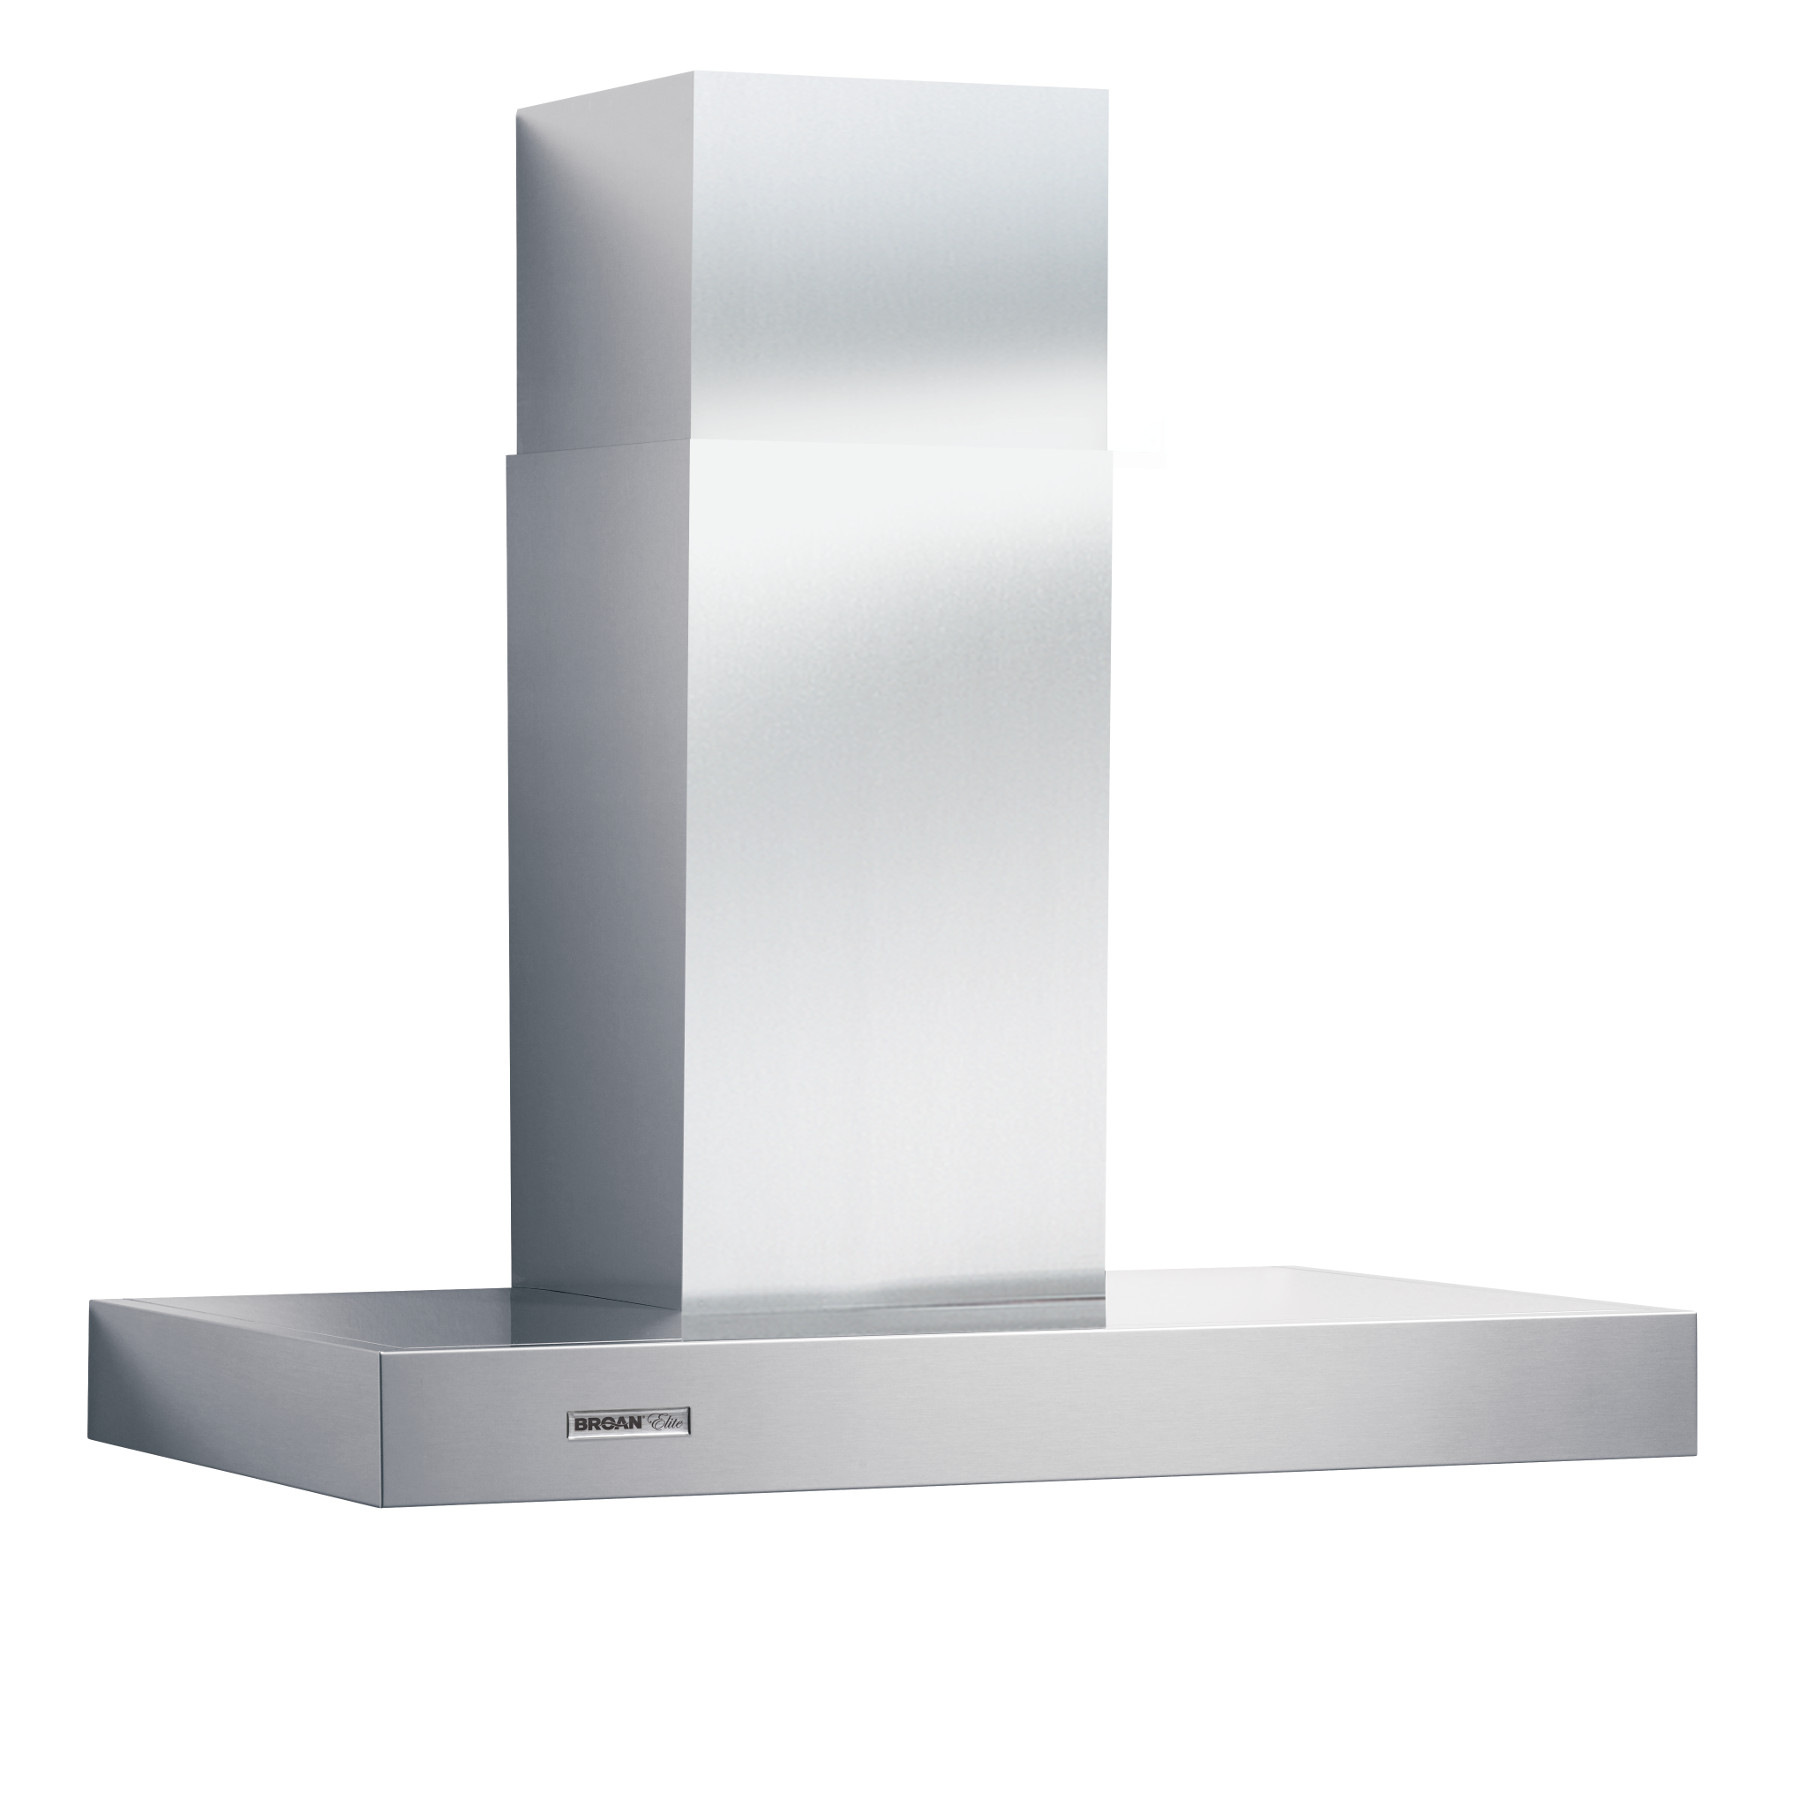 DISCONTINUED-Broan® 42-Inch Convertible Wall-Mount Chimney Range Hood w/ Heat Sentry™, 370 CFM, Stainless Steel